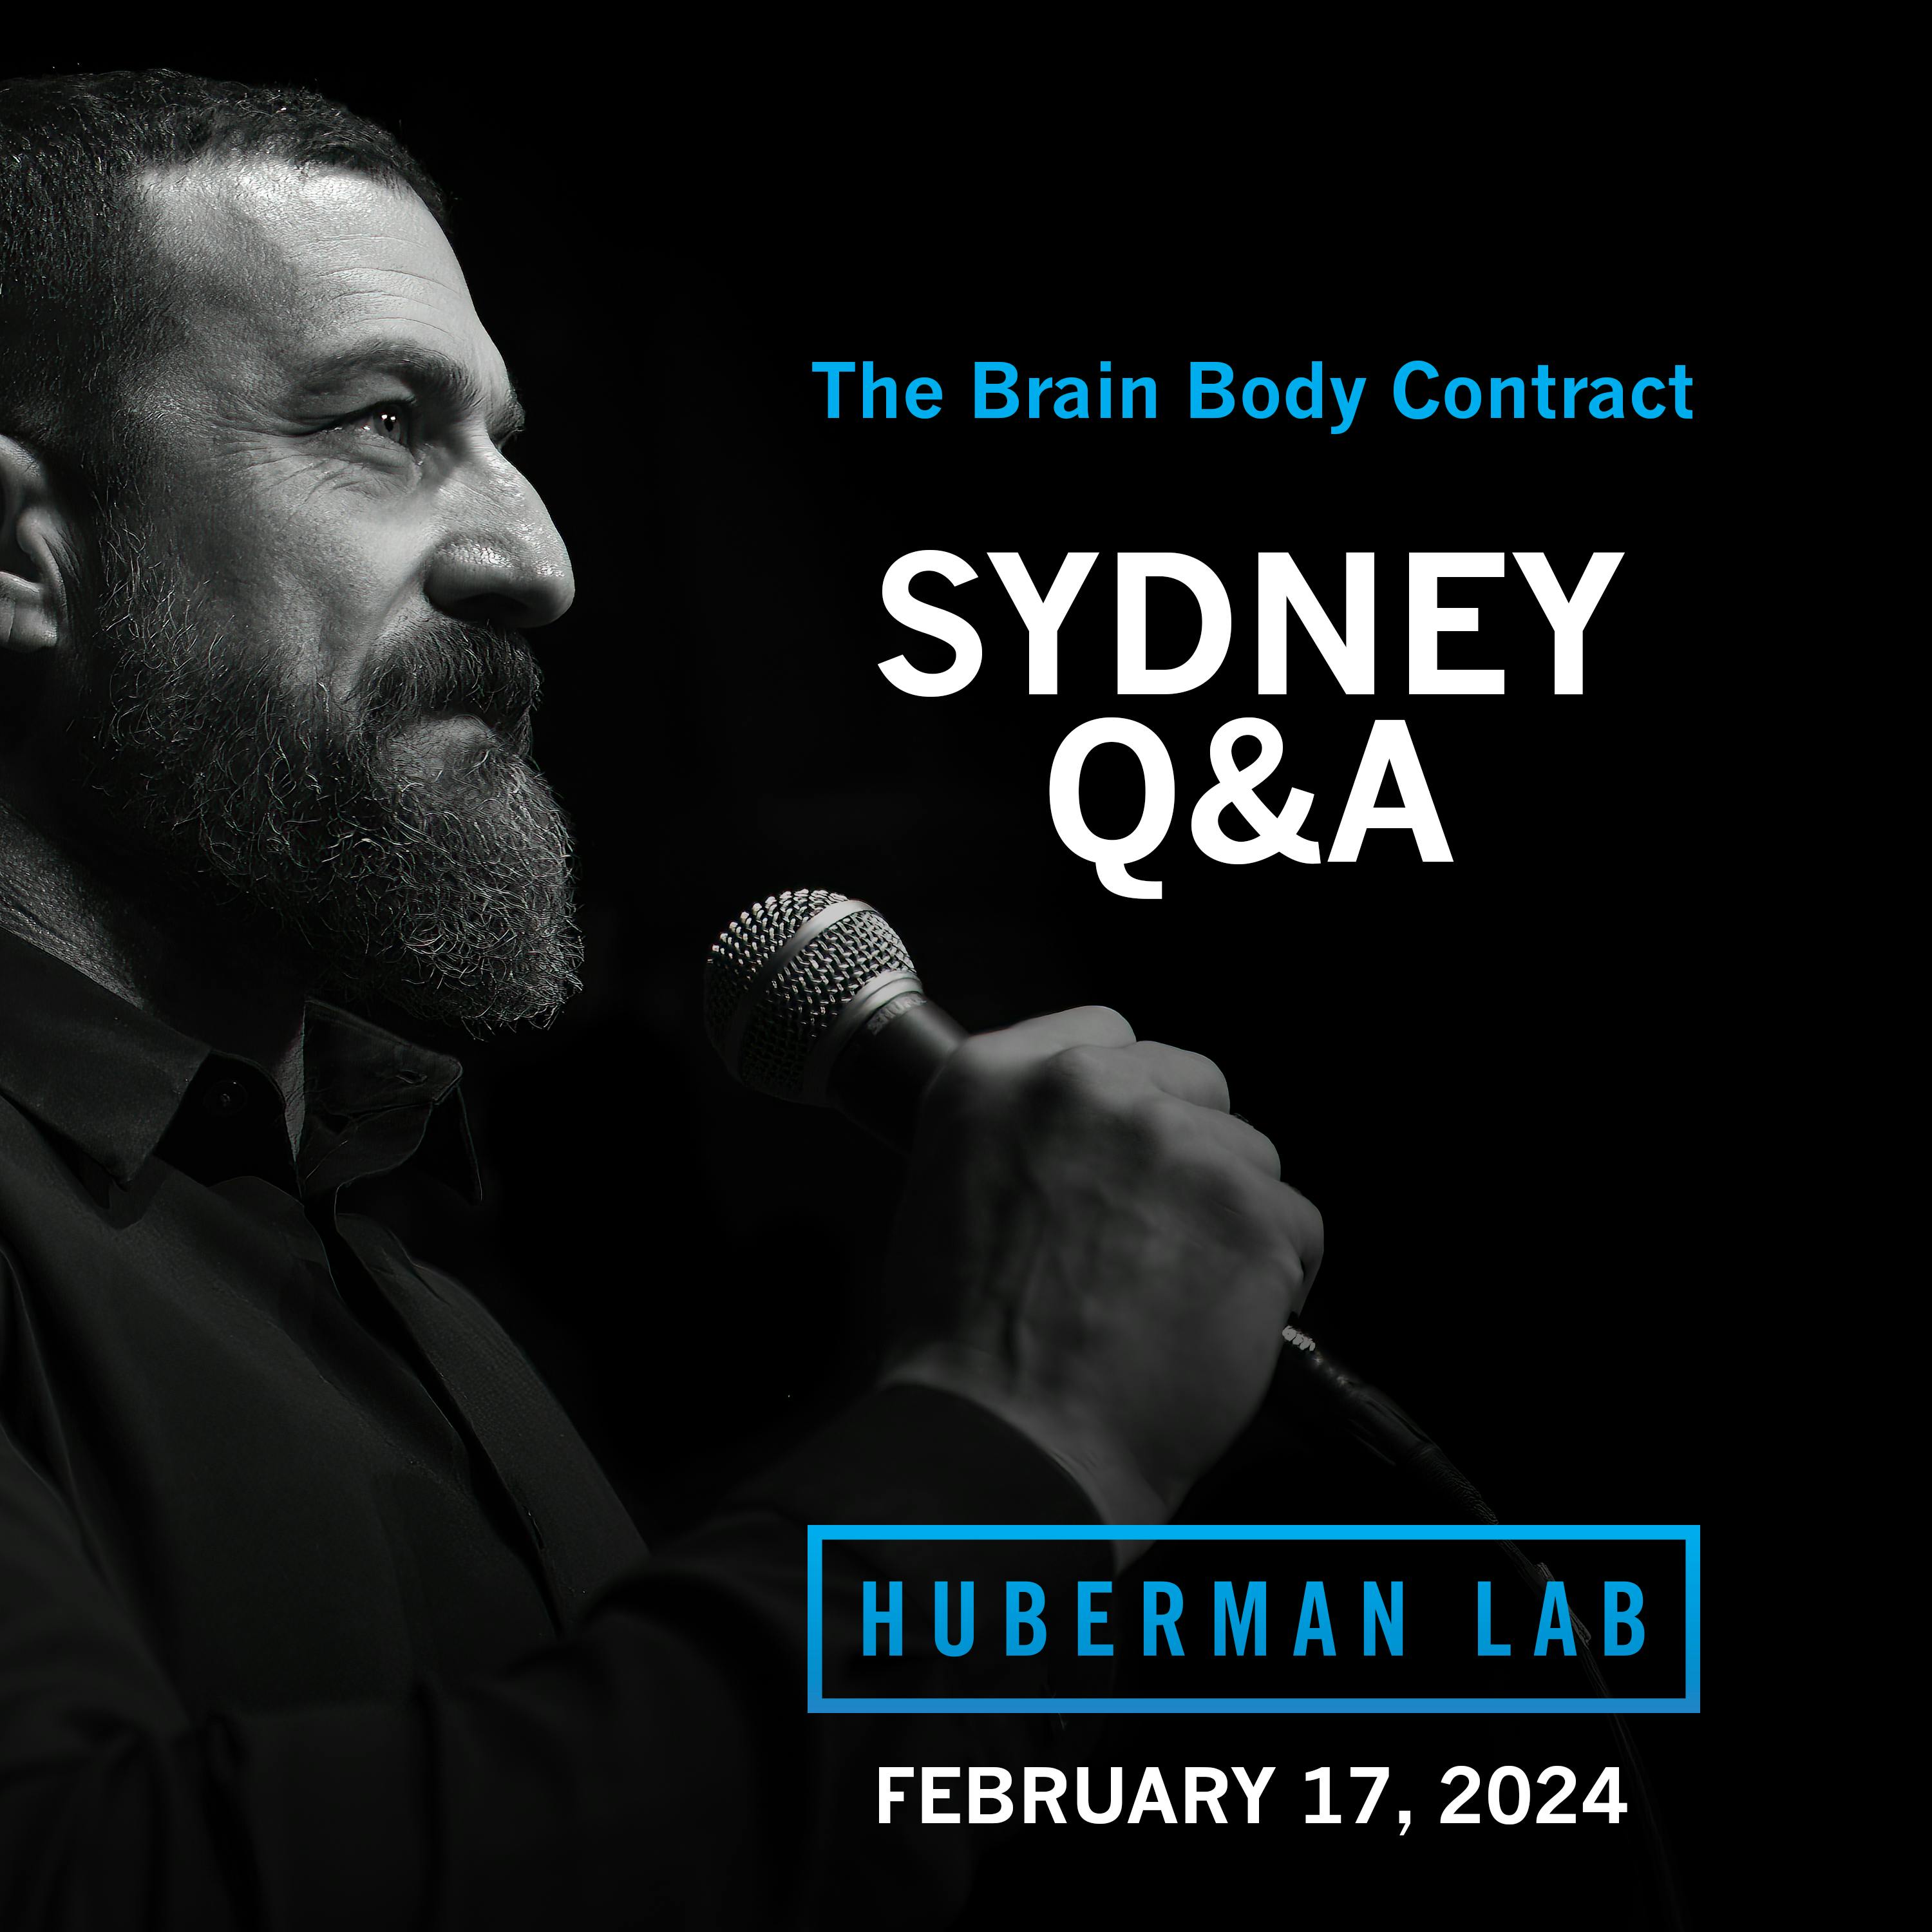 LIVE EVENT Q&A: Dr. Andrew Huberman at the Sydney Opera House